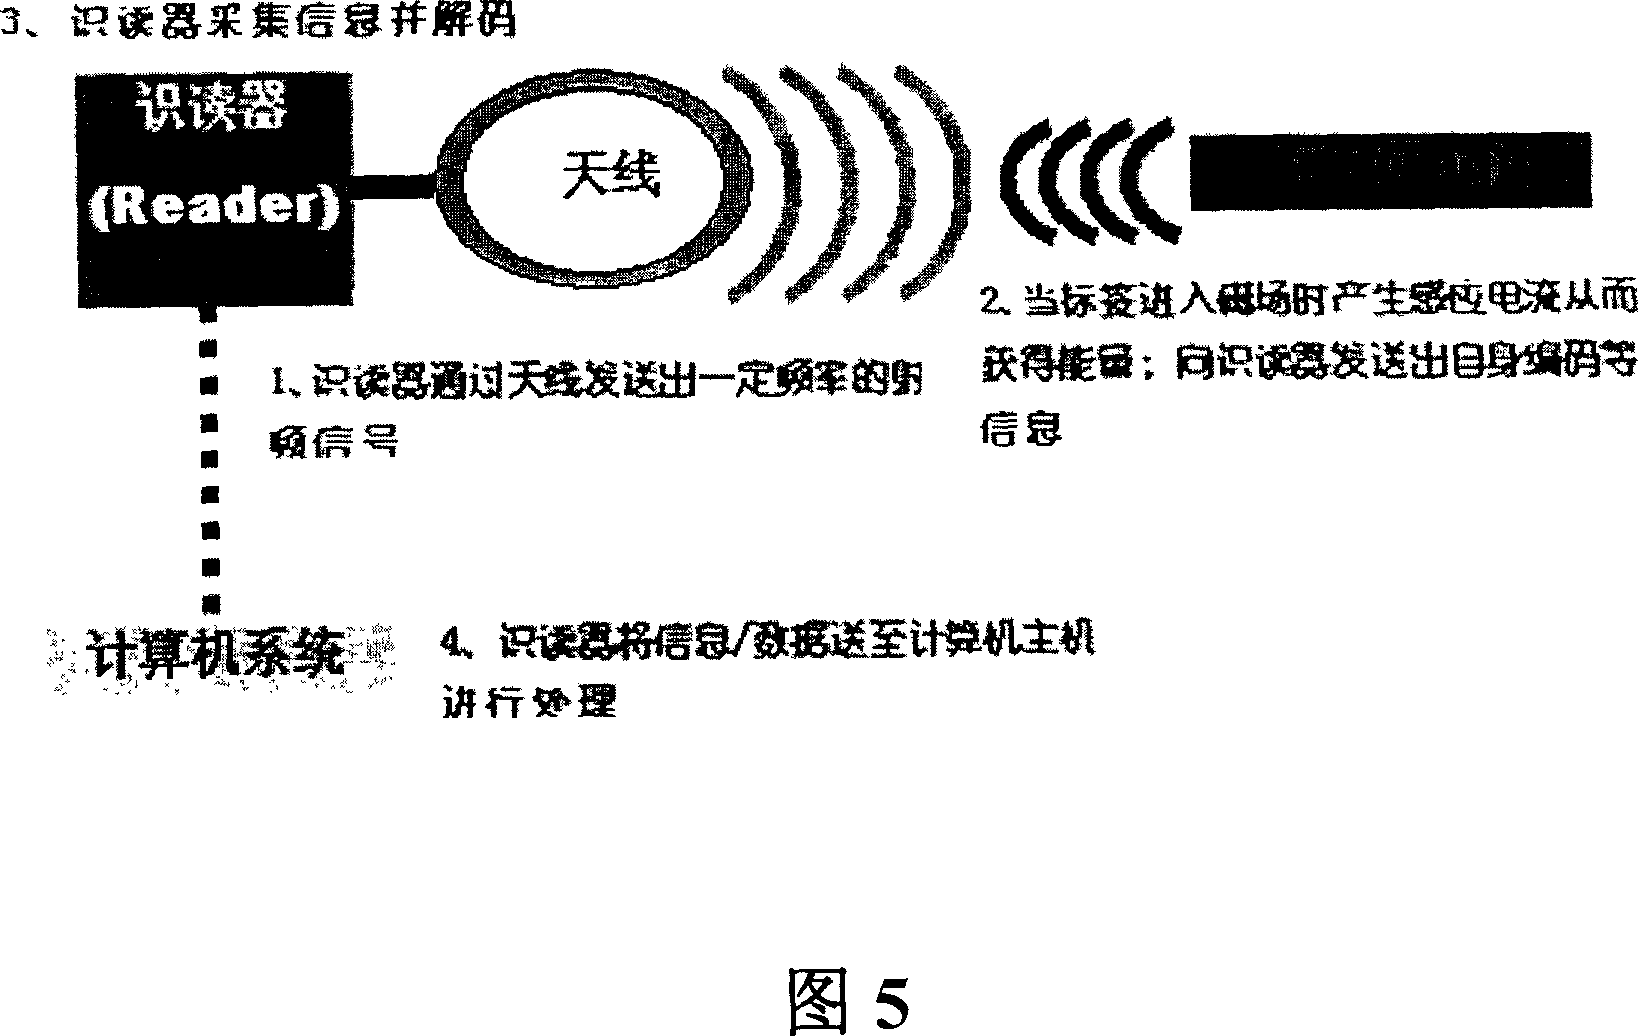 Non-contact paper base electronic passenger ticket based on electronic label technology